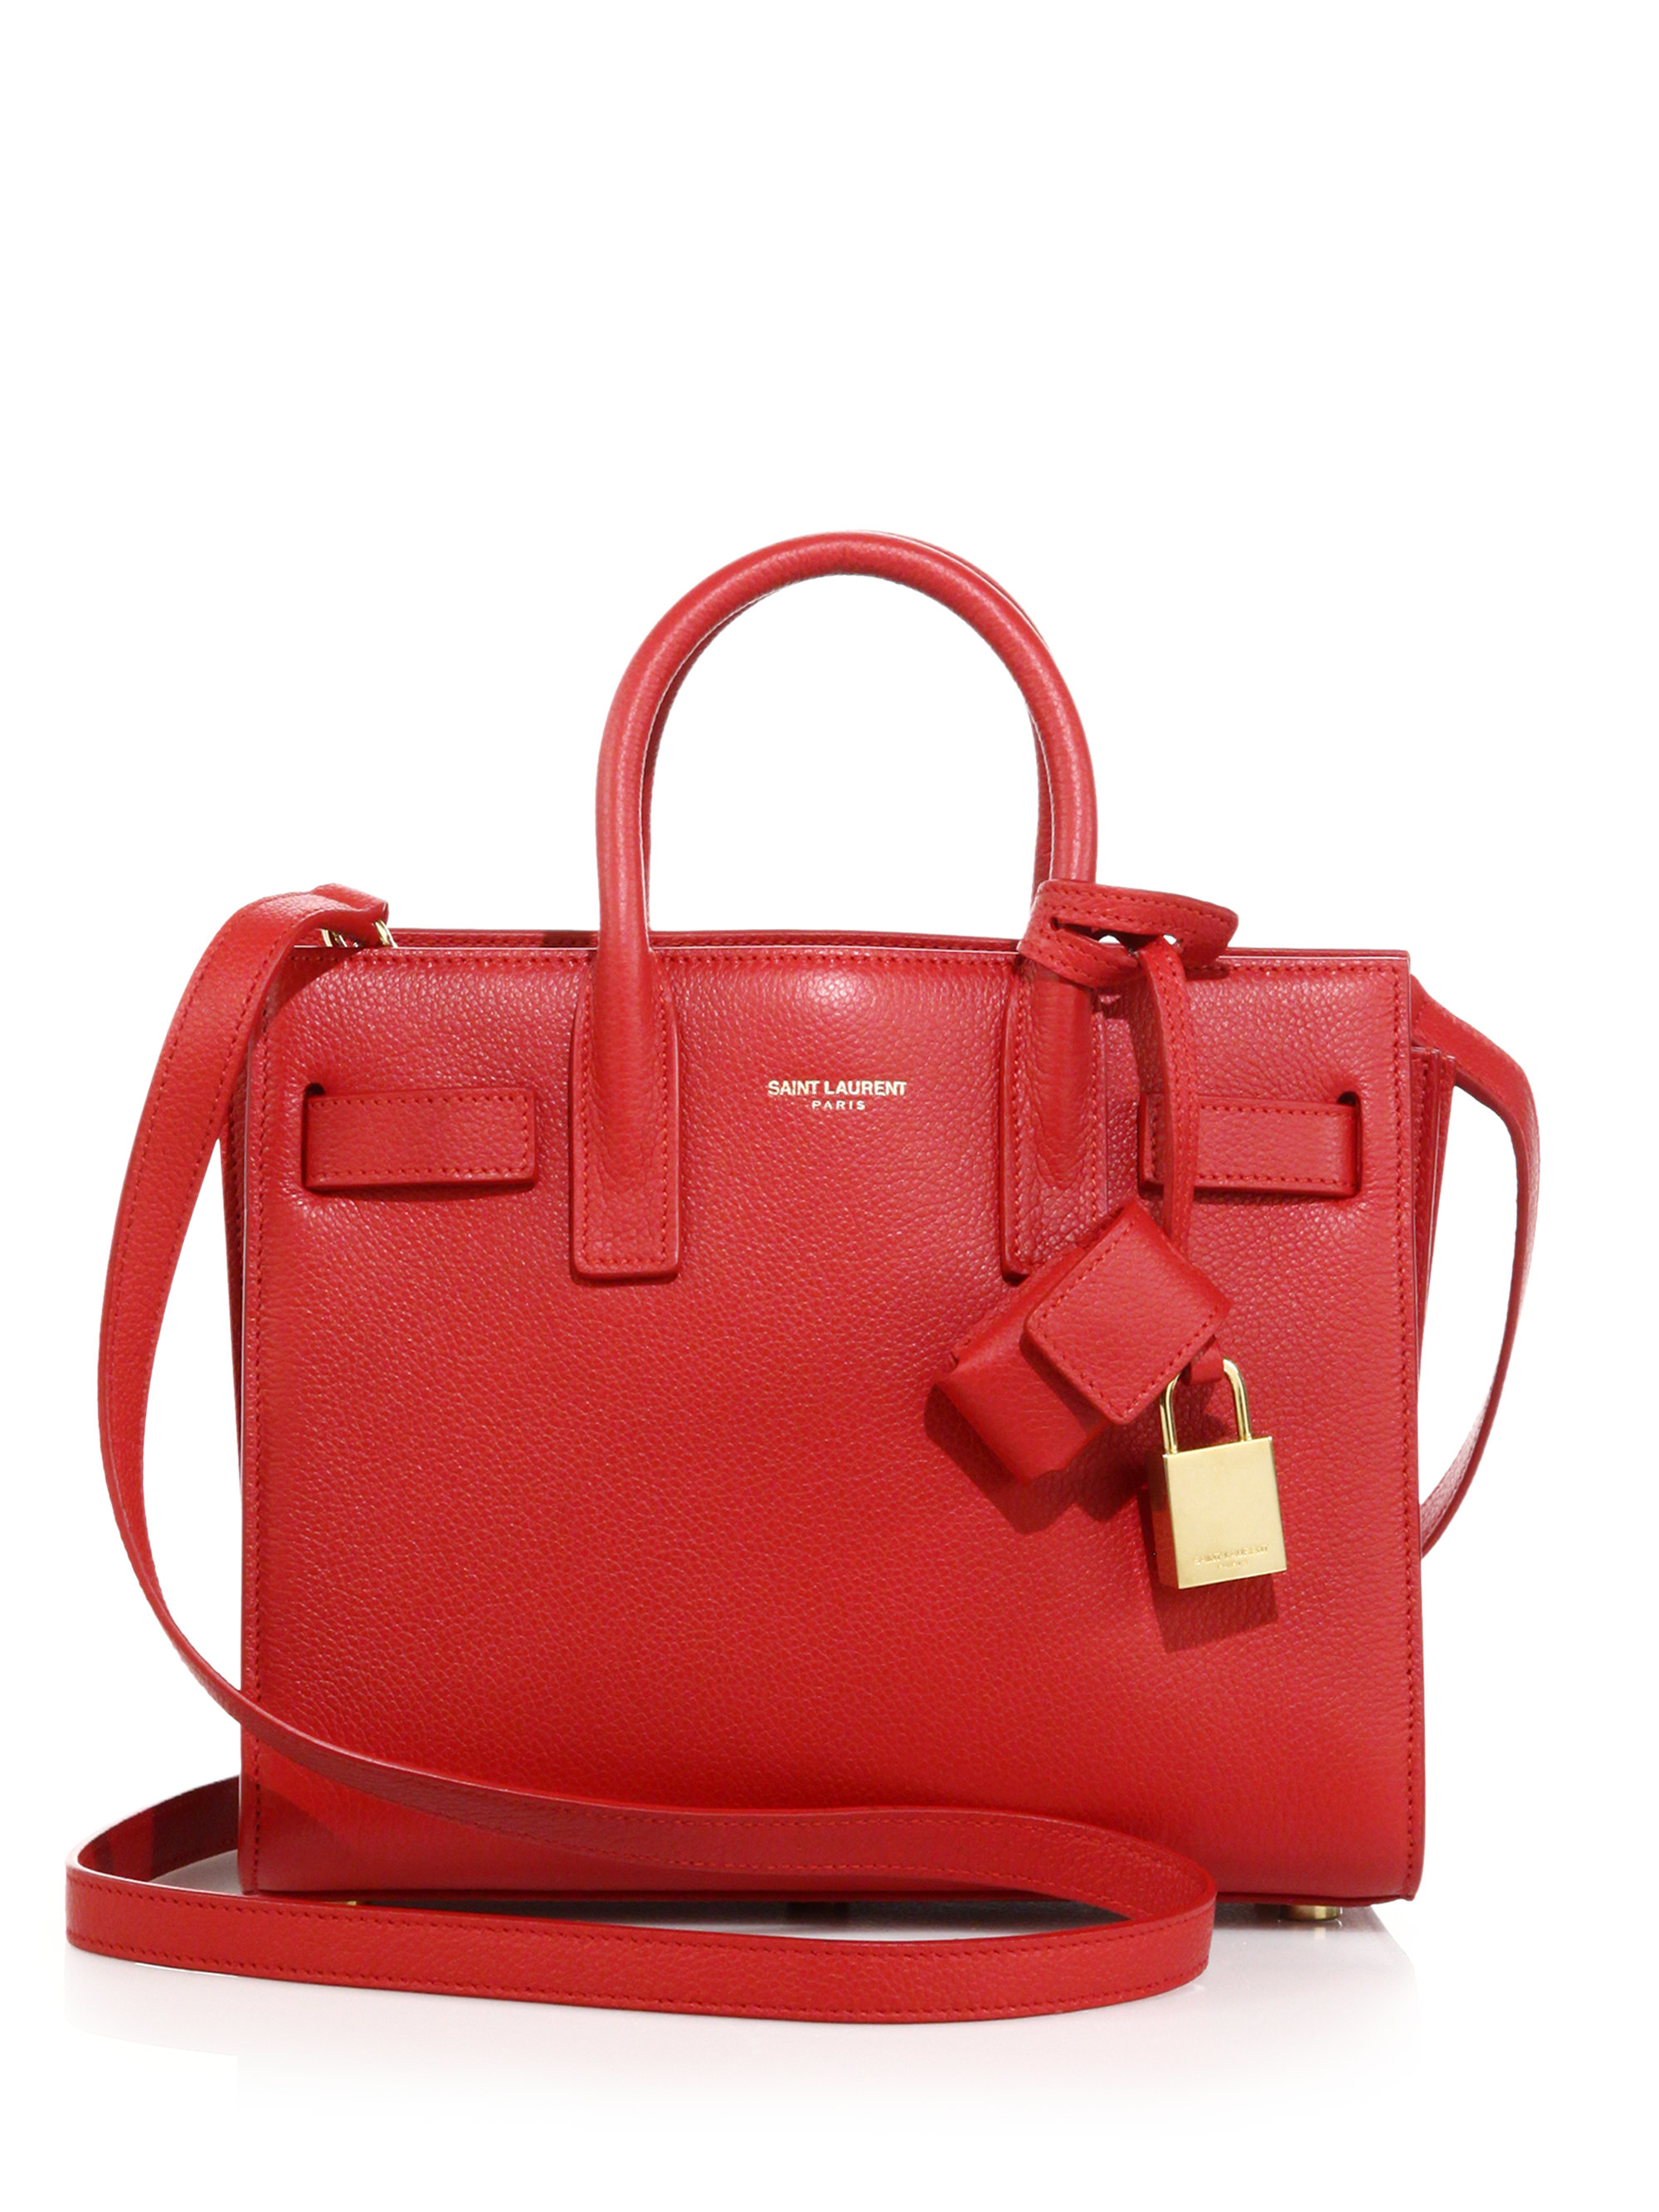 Saint laurent Sac De Jour Nano Textured Leather Tote in Red | Lyst